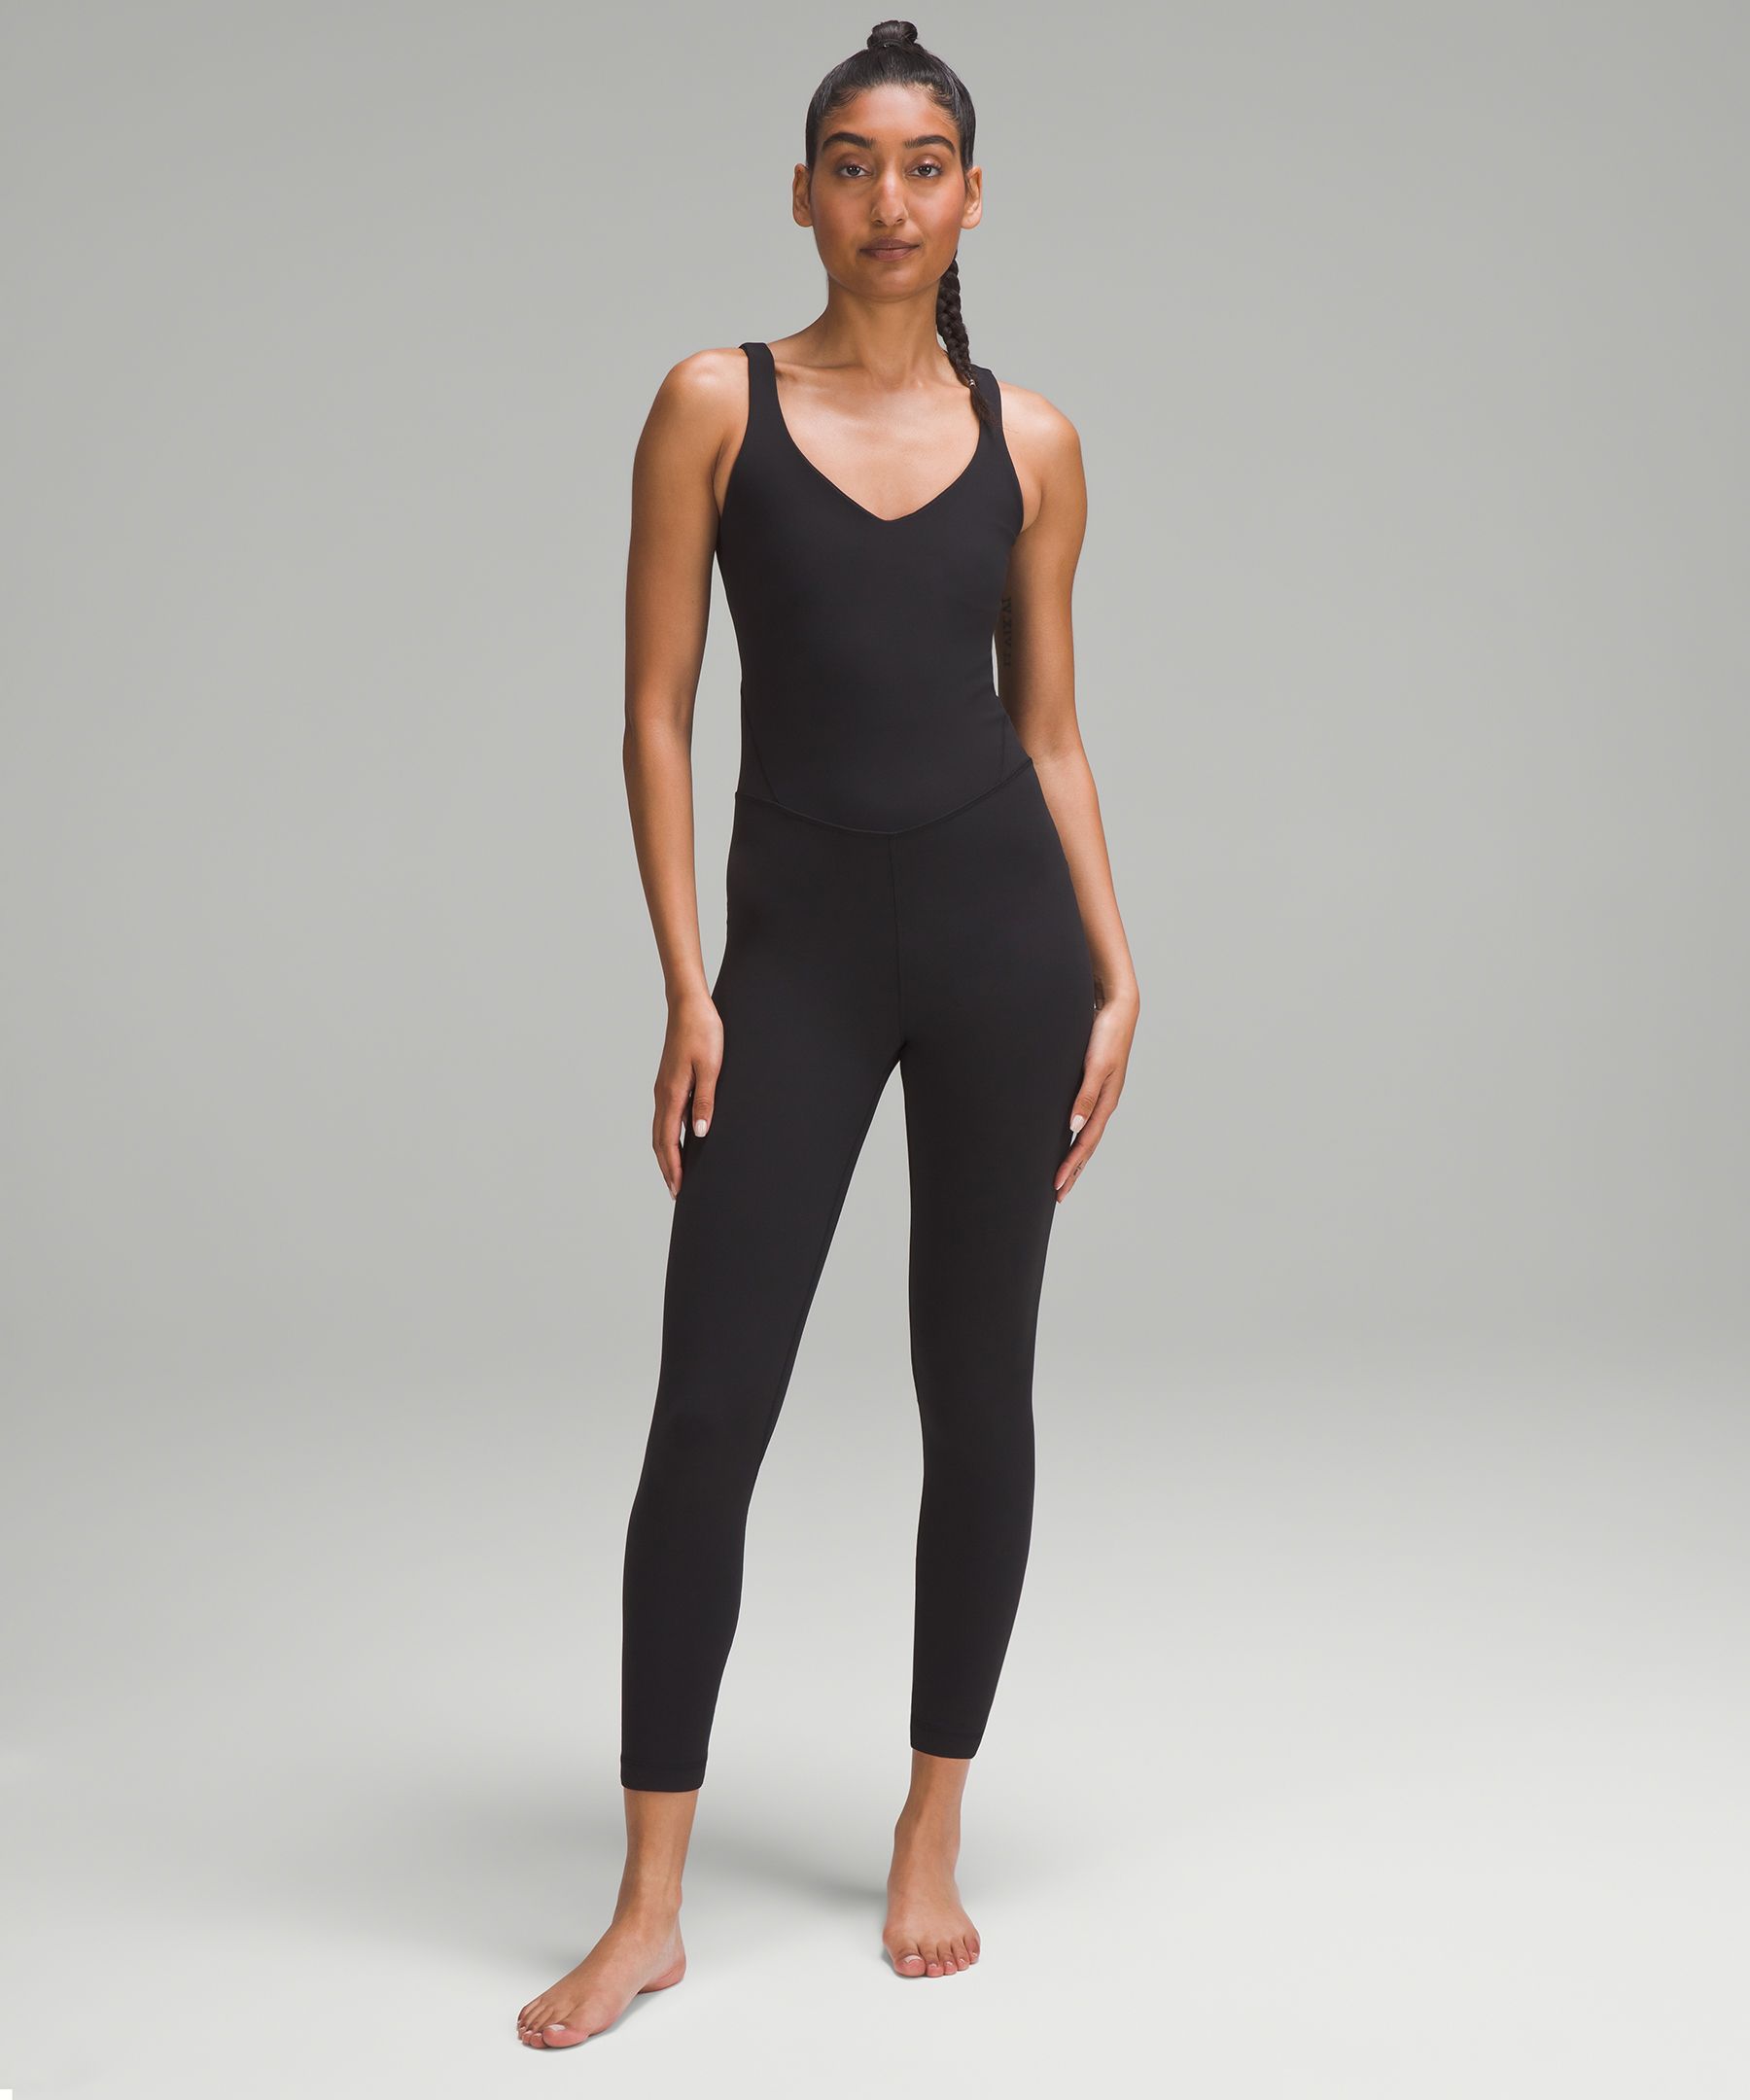 lululemon snapped with this align bodysuit for the tall girls